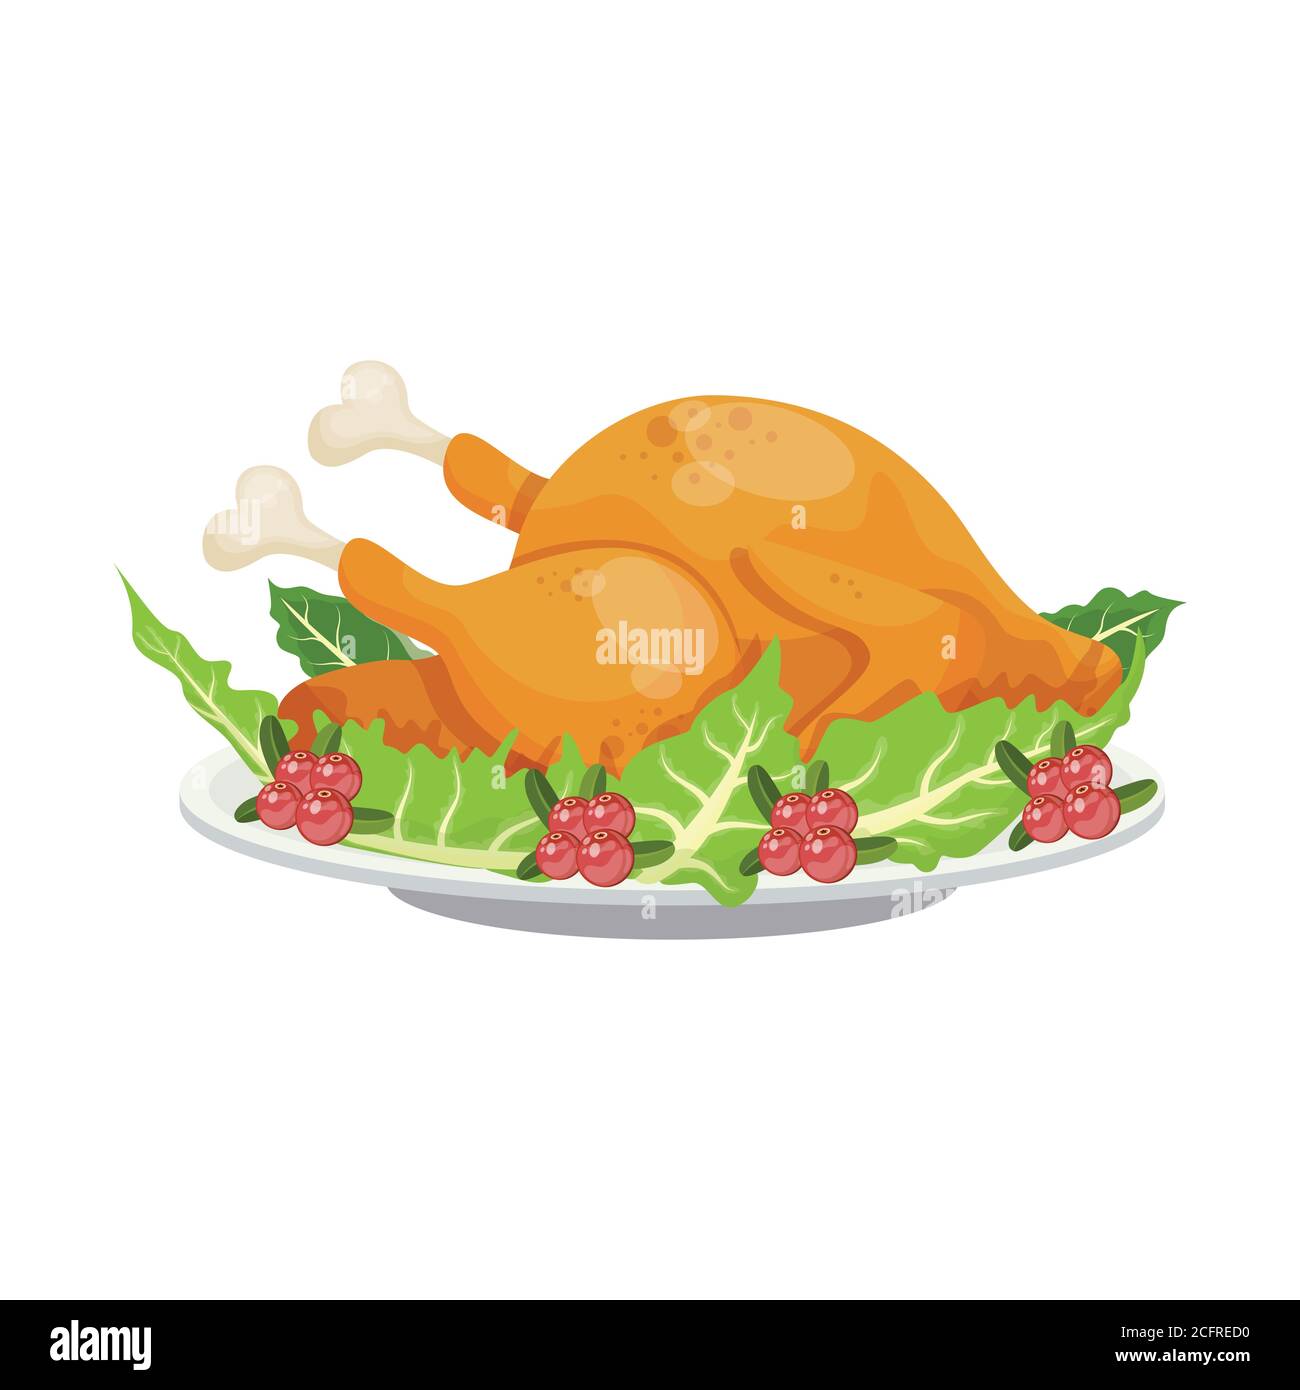 Cartoon fried turkey traditional Thanksgiving day family dinner dish with cranberries and salad leaves garnish. vector illustration. Stock Vector